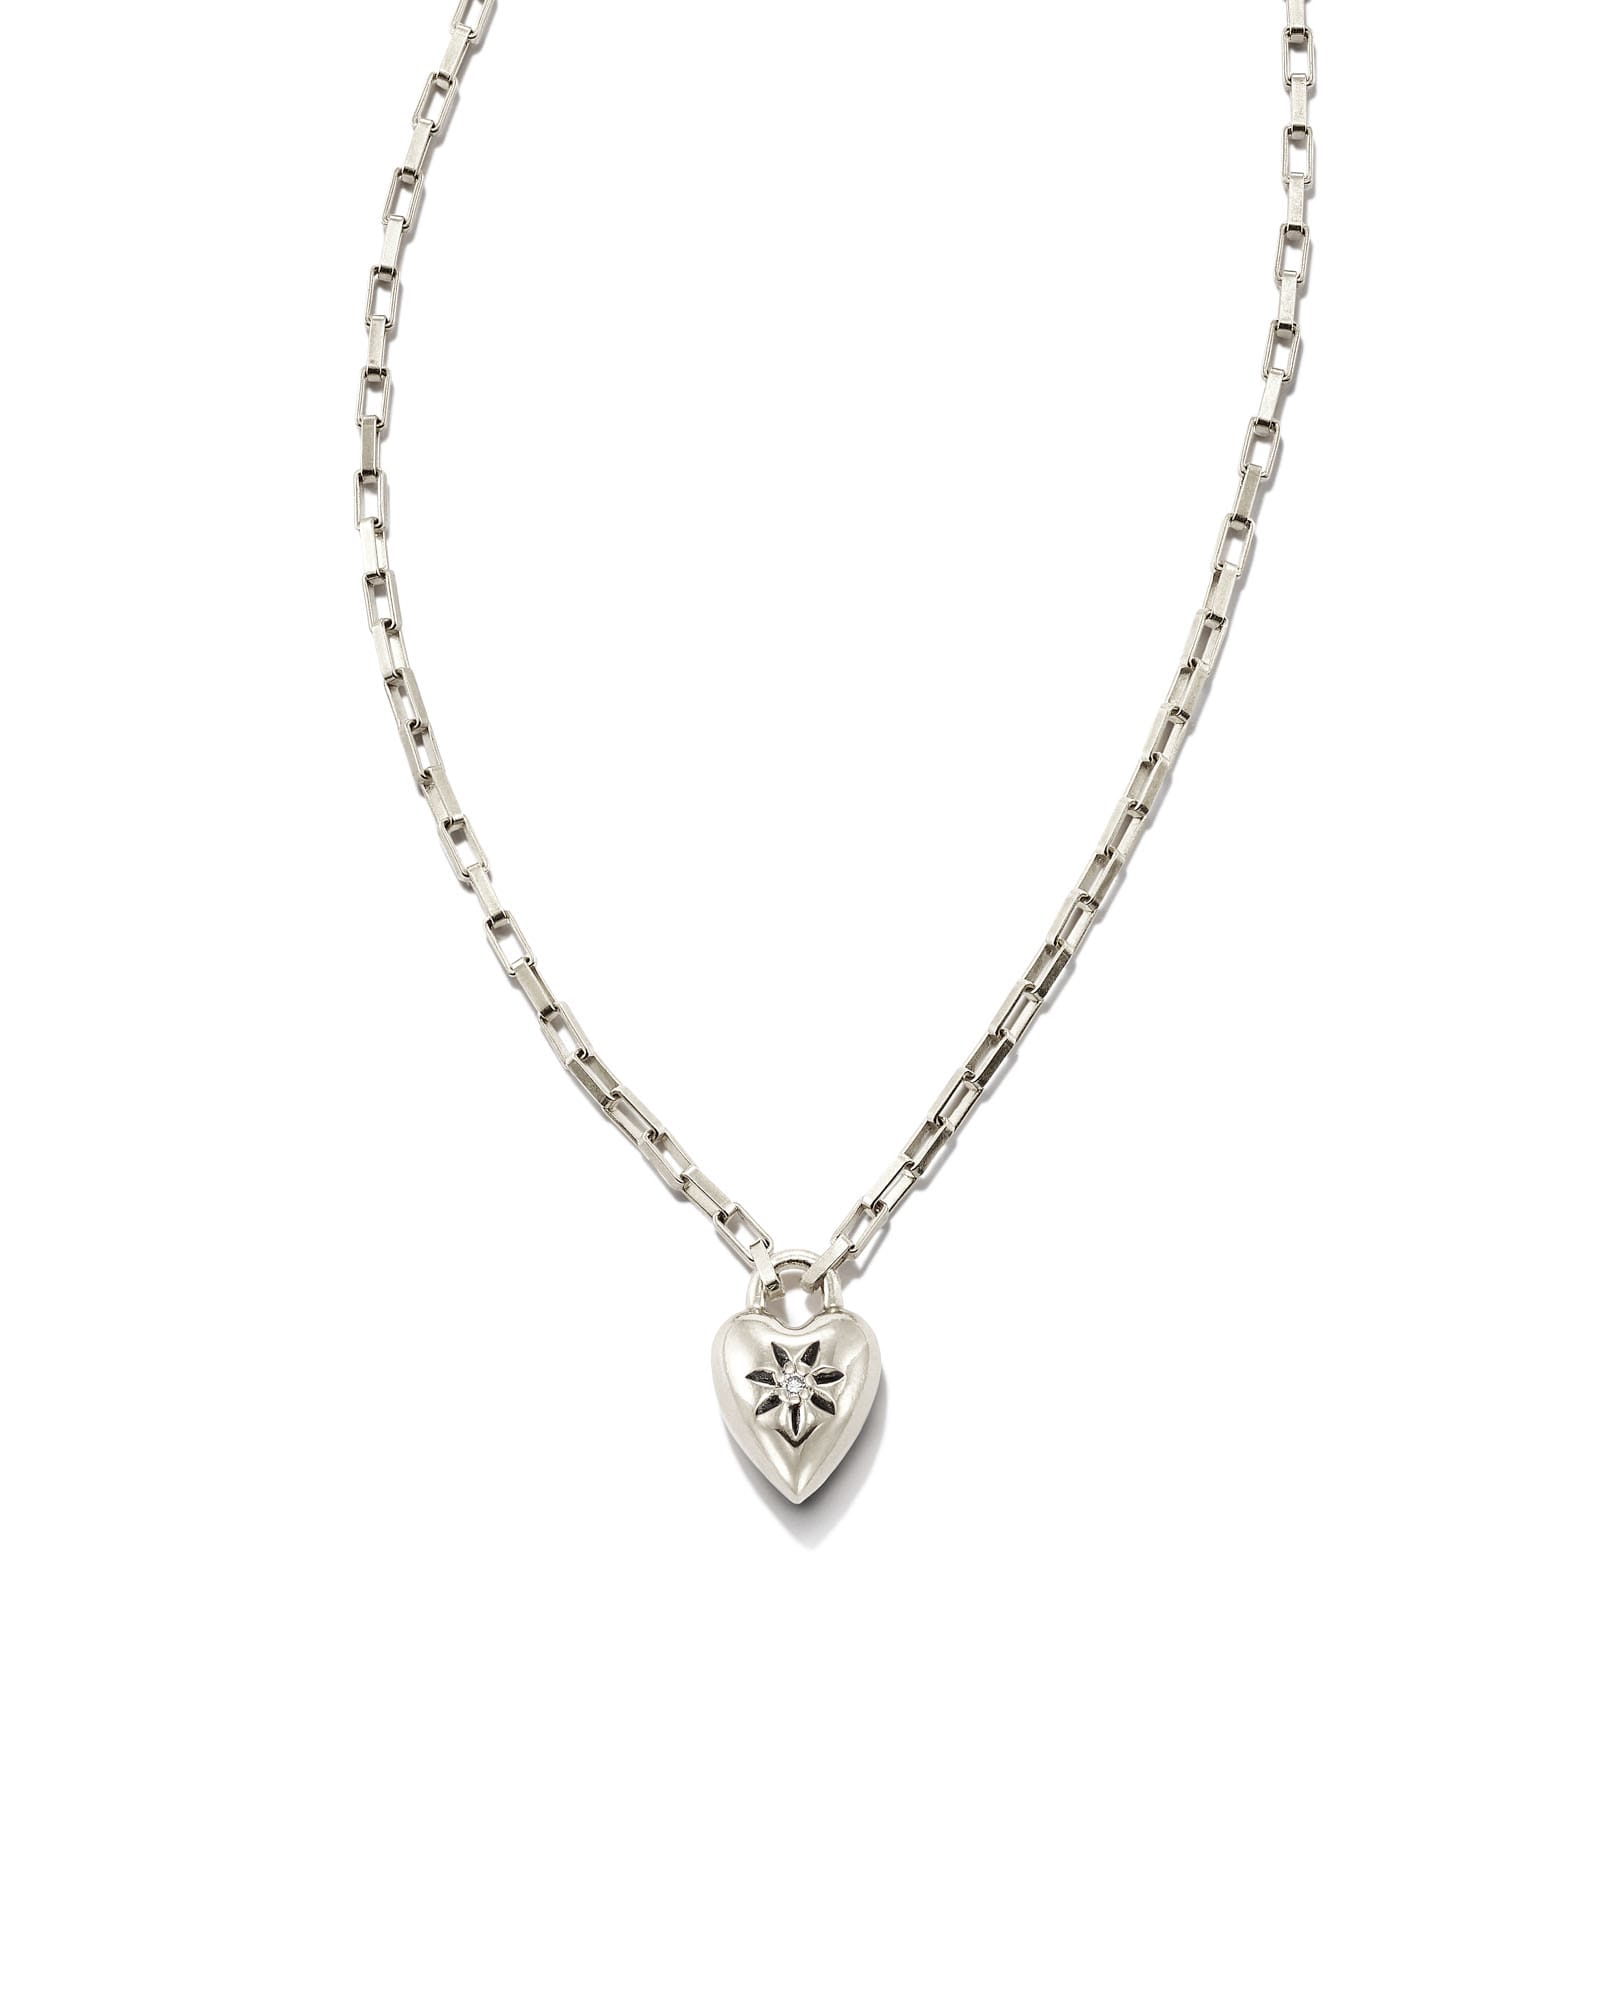 Kendra Scott Angie Heart Bright Cut Pendant Necklace in Sterling Silver | Diamonds